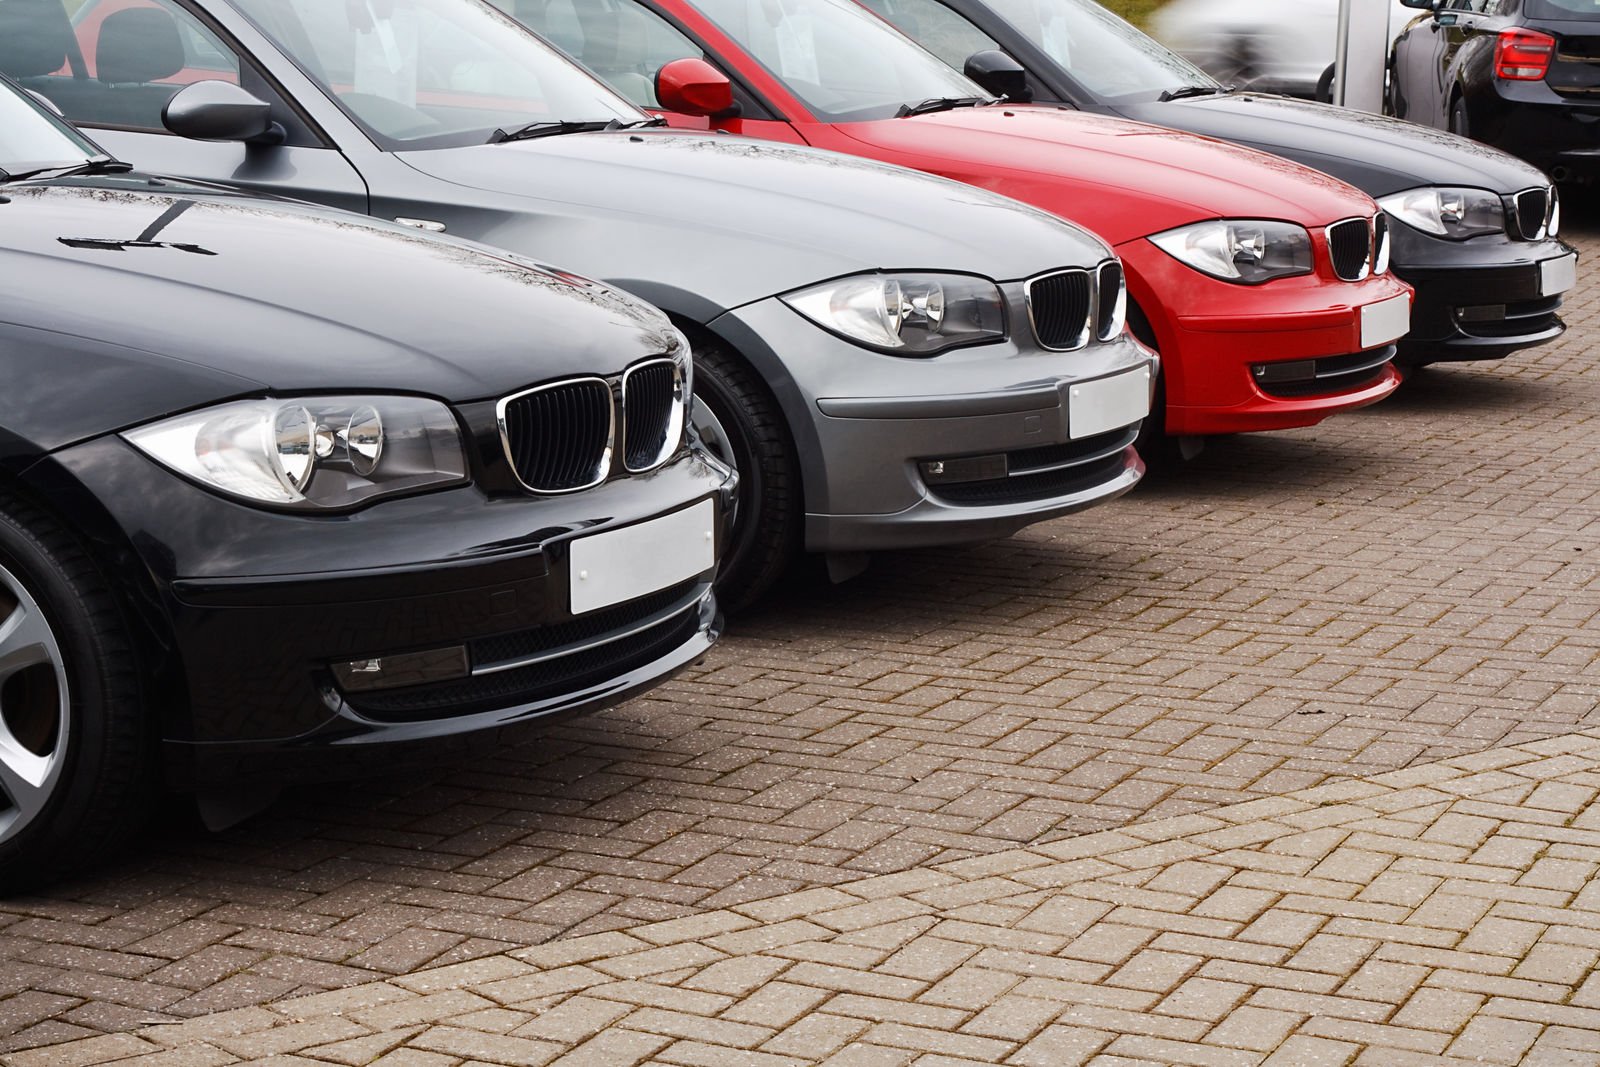 4 Tips to Know When to Buy Insurance after Buying a Car